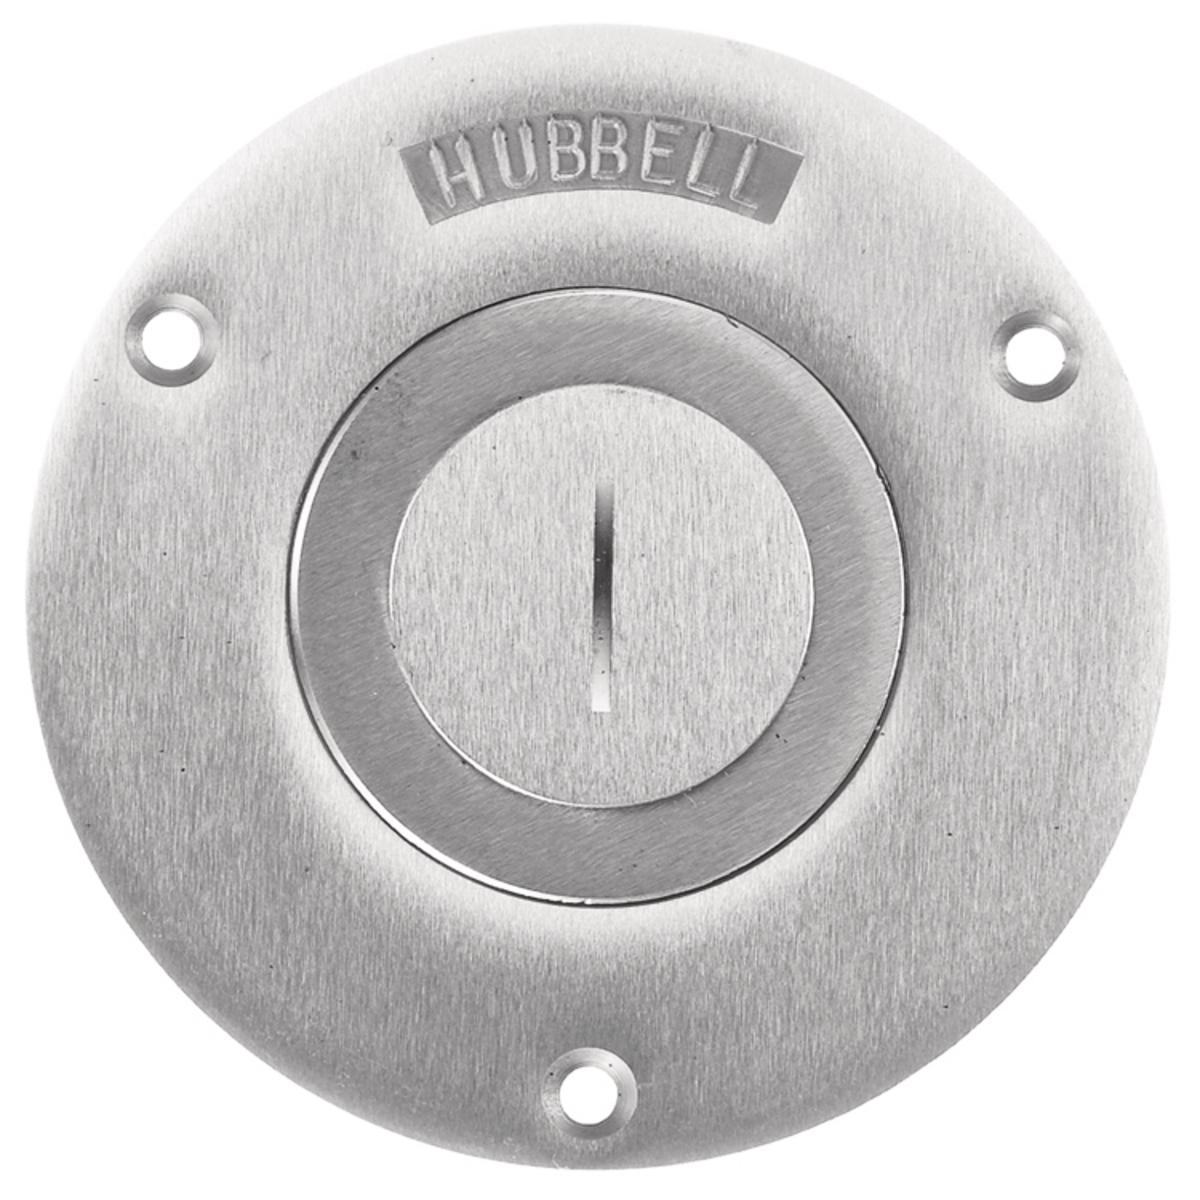 Hubbell SA2725 Flush Concrete Floor Box Series, 1-Gang Cover, Round, Combination 2-1/8"X 1" Threaded Opening, Aluminum  ; Flush Round Floorbox Cover ; Single Gang ; Brushed Aluminum Finish, Mounting Hardware Included ; Standard Product